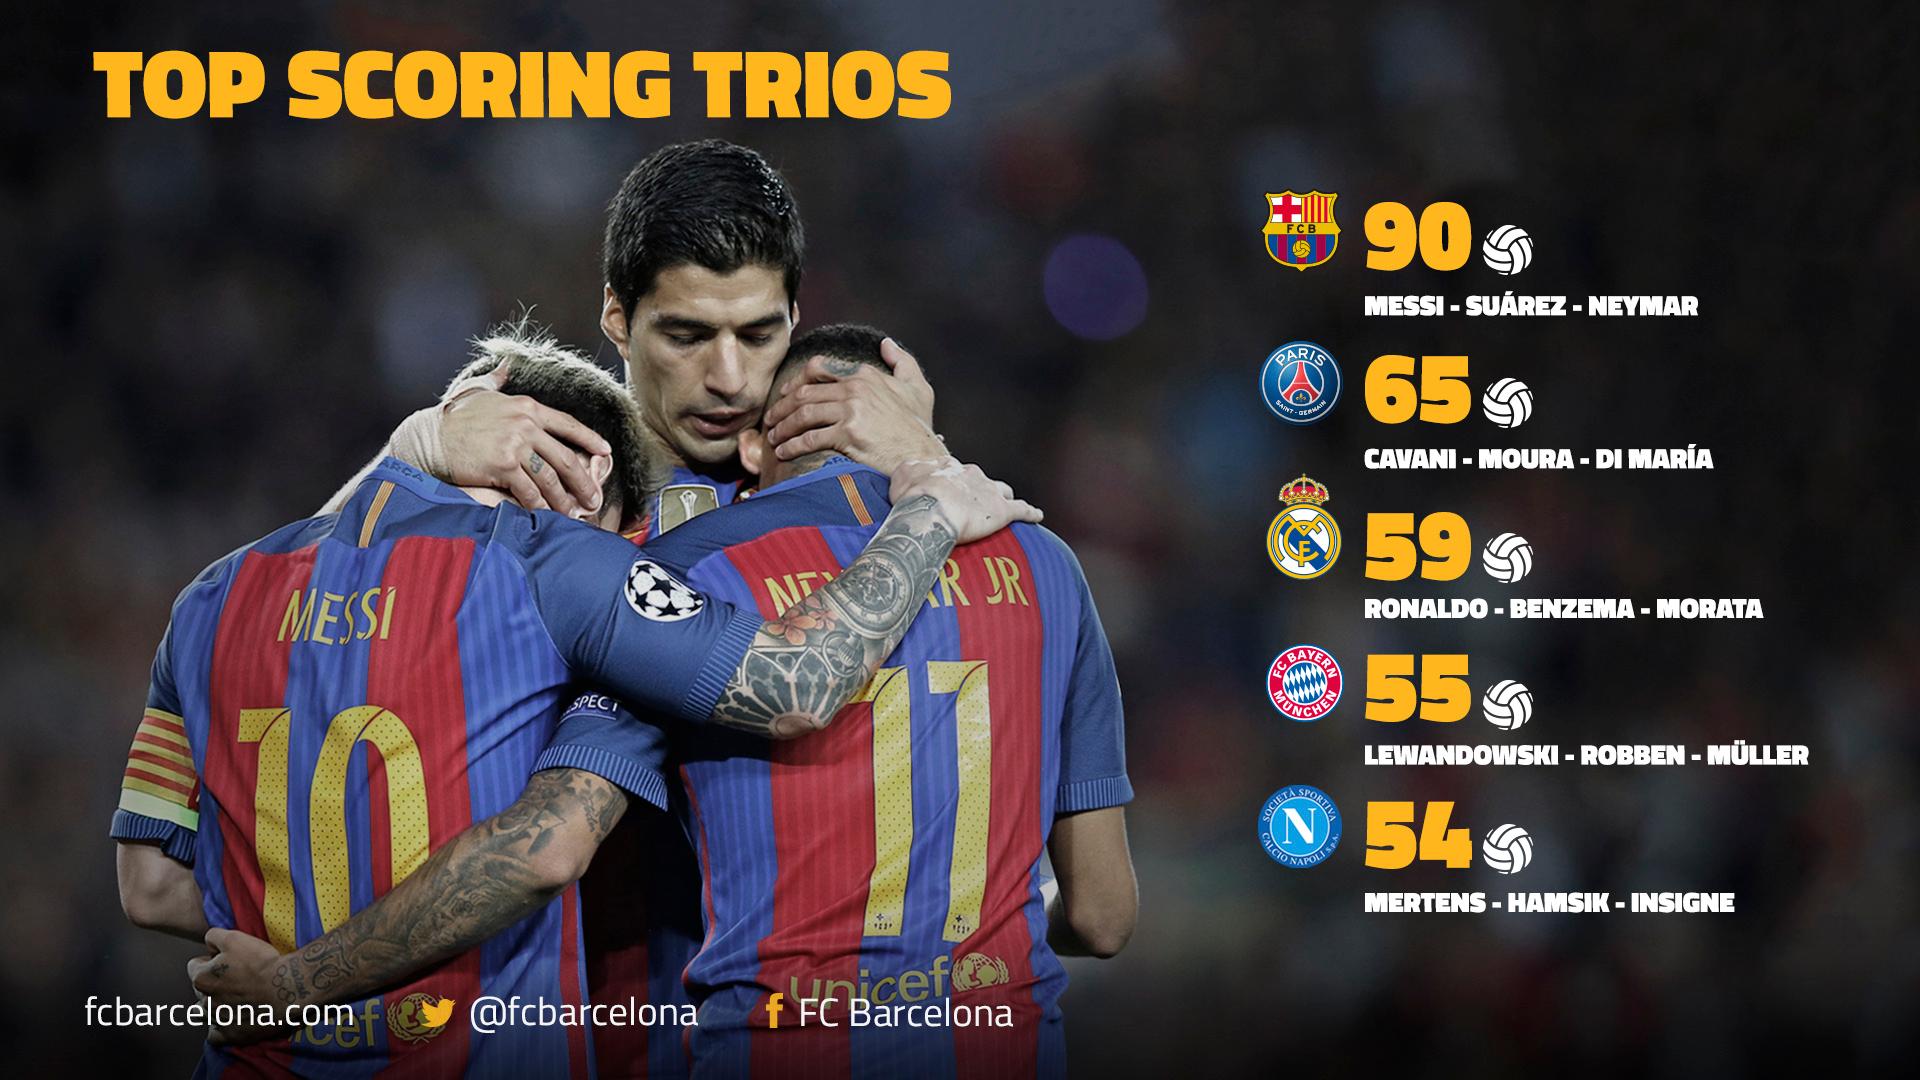 Messi, Suárez and Neymar are the most lethal trident in Europe